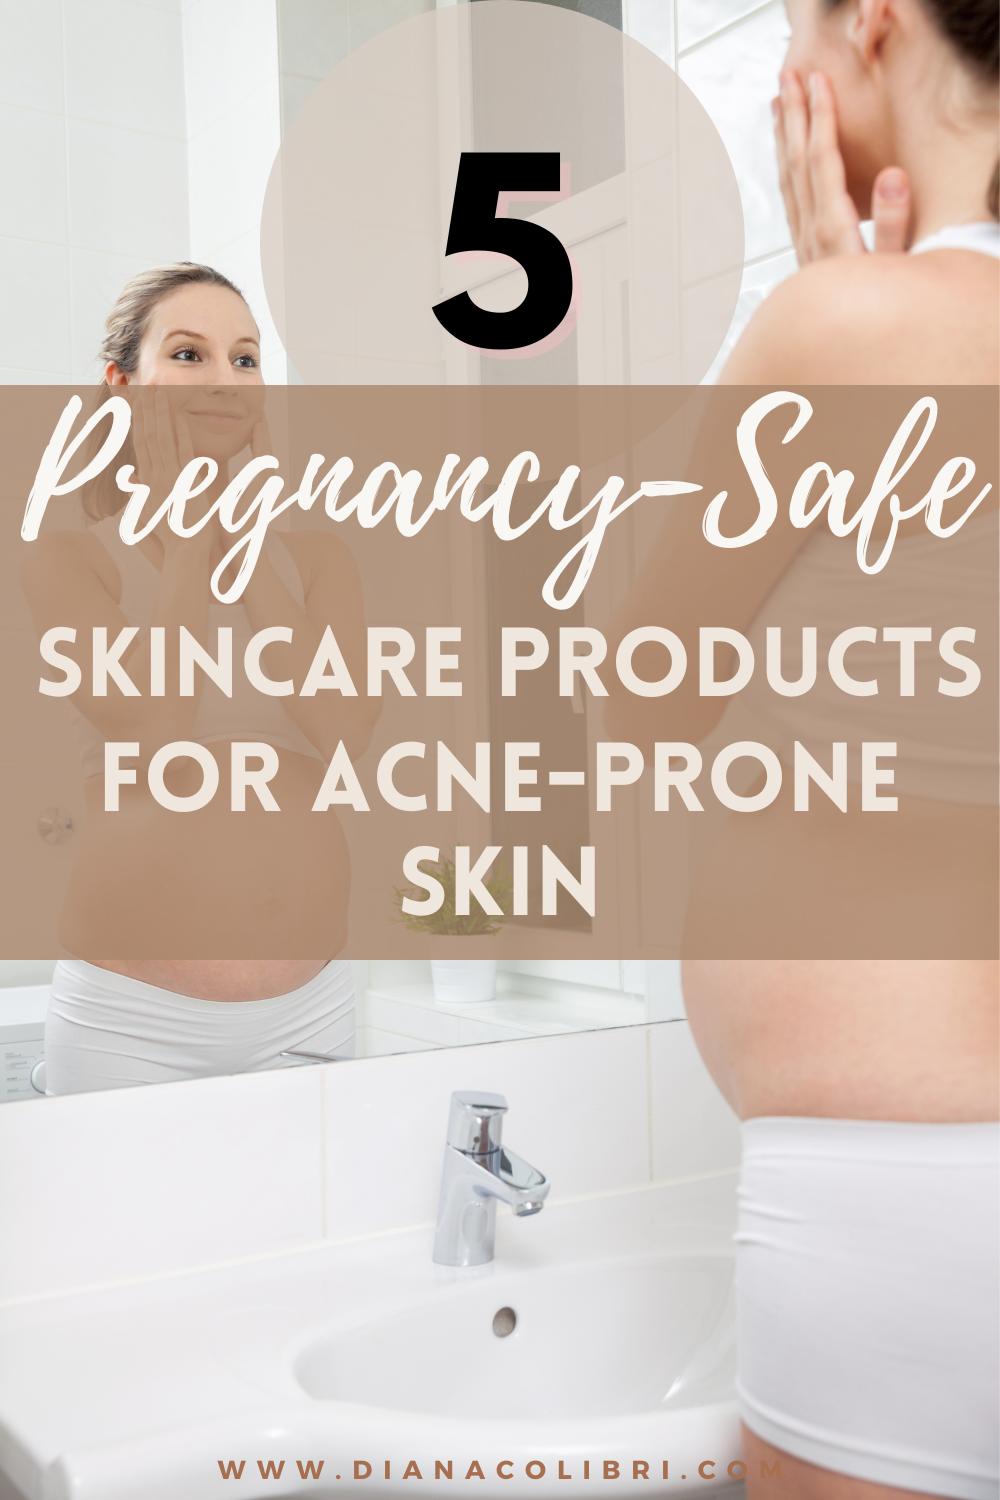 Pregnancy-Safe Facial Skincare Products for Acne Prone Skin